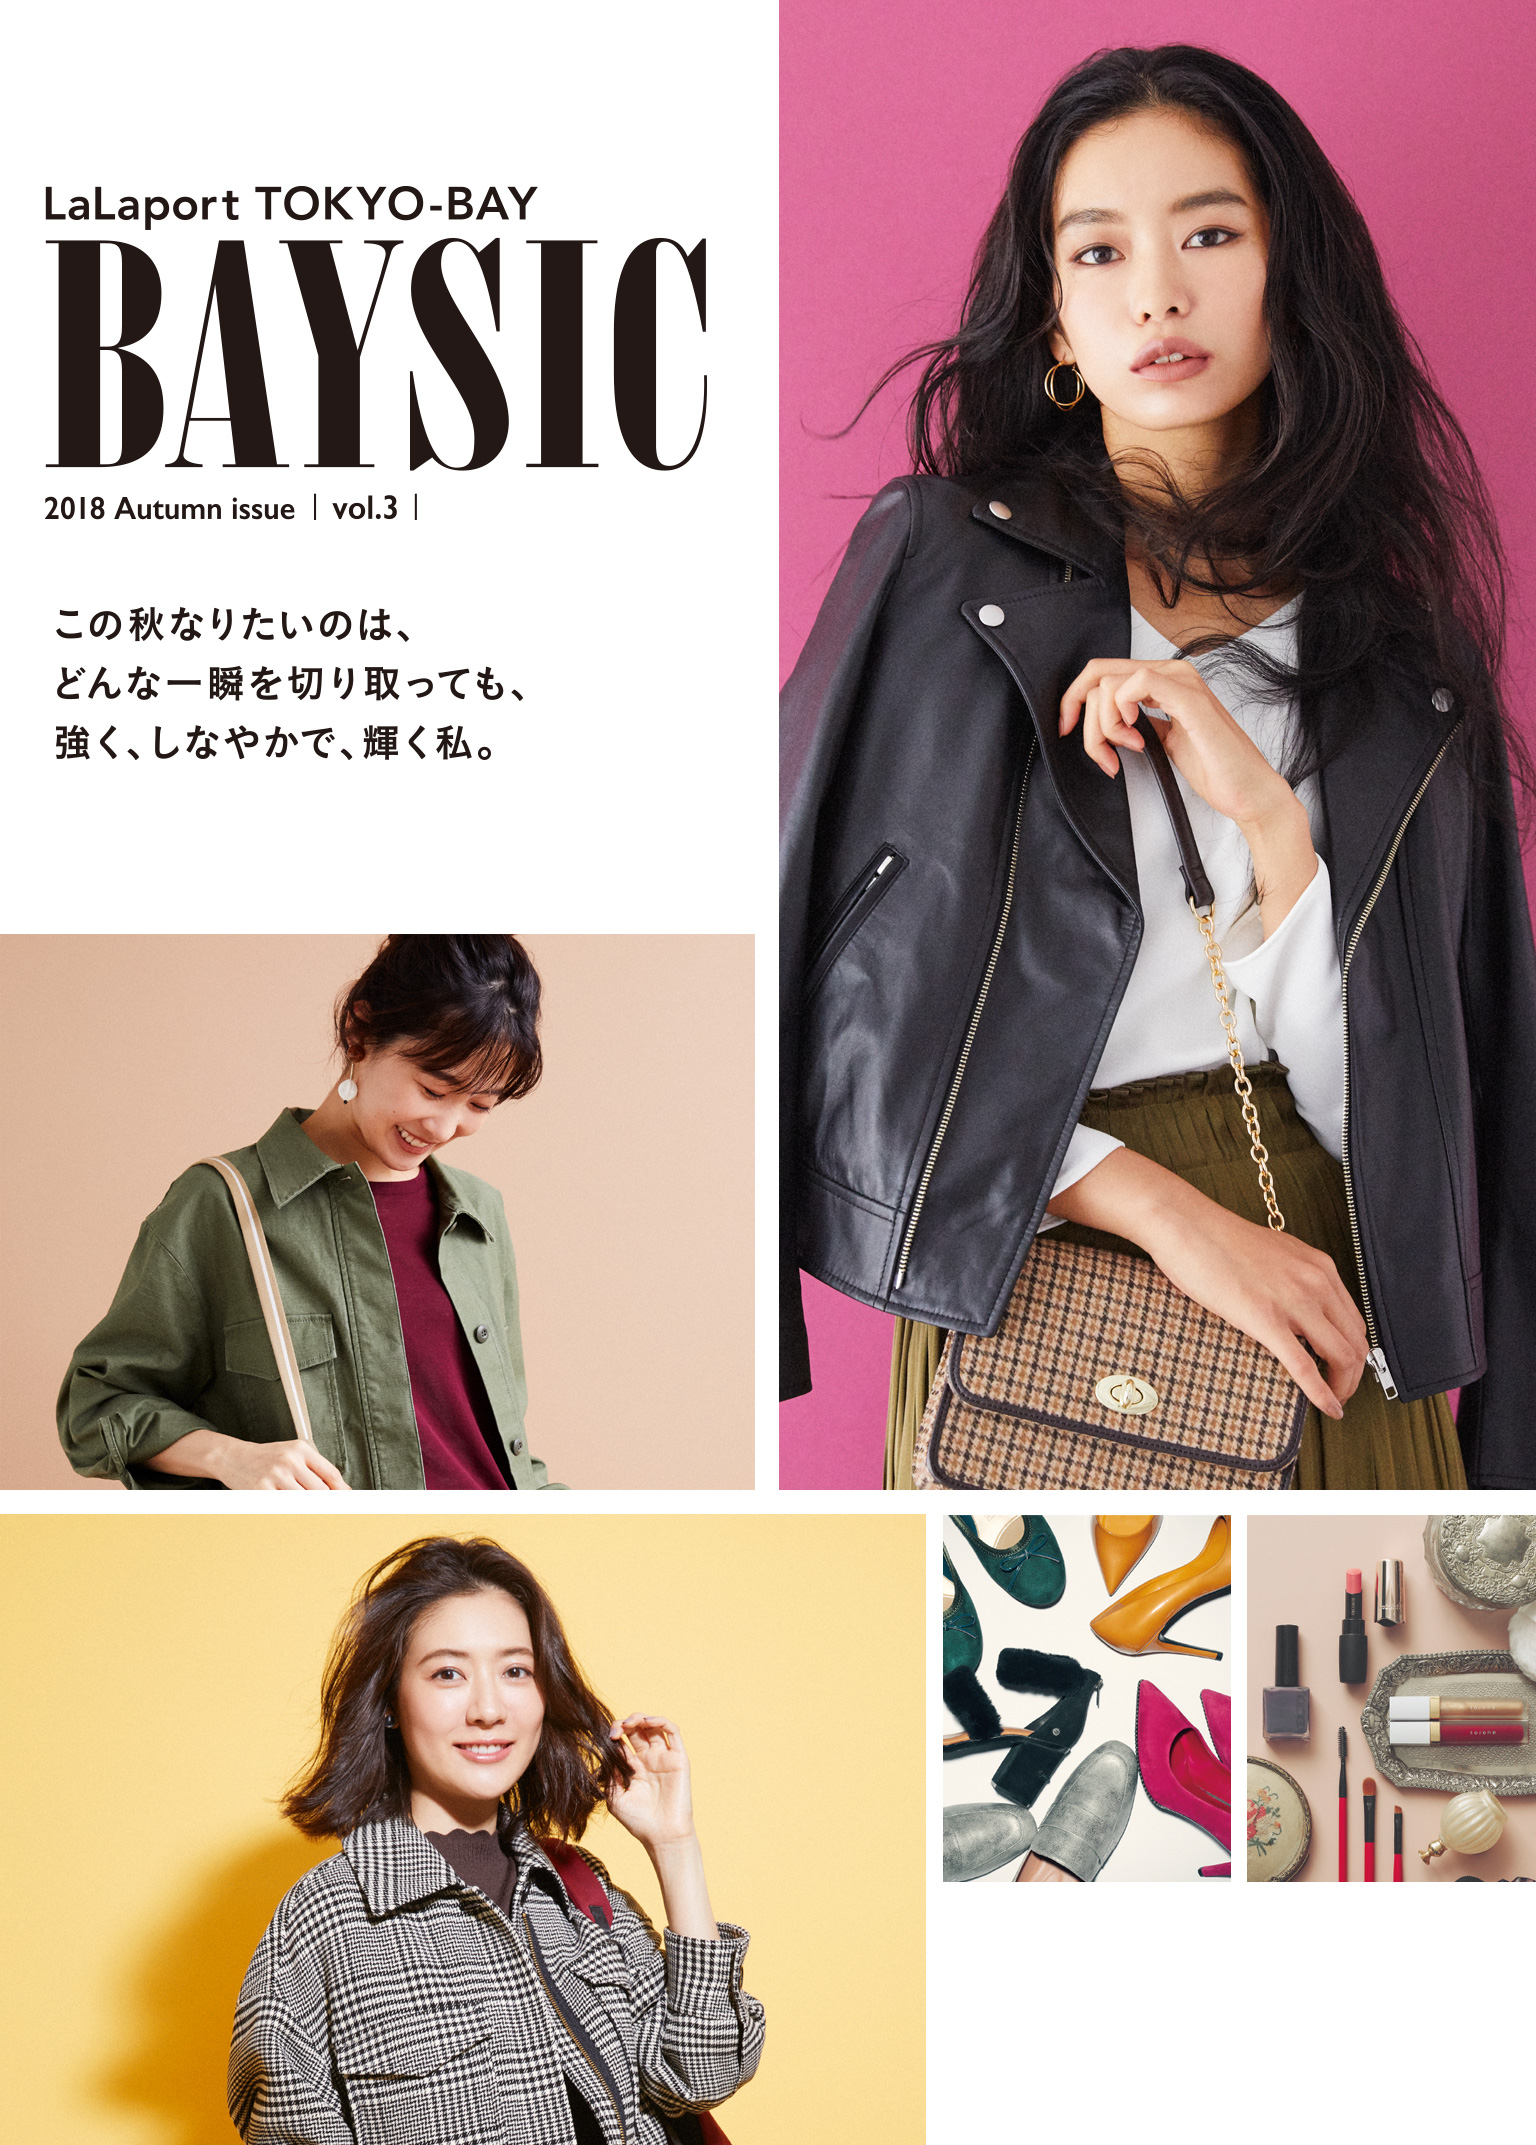 LaLaport TOKYO-BAY BAYSIC vol.3 2018 Autumn issue